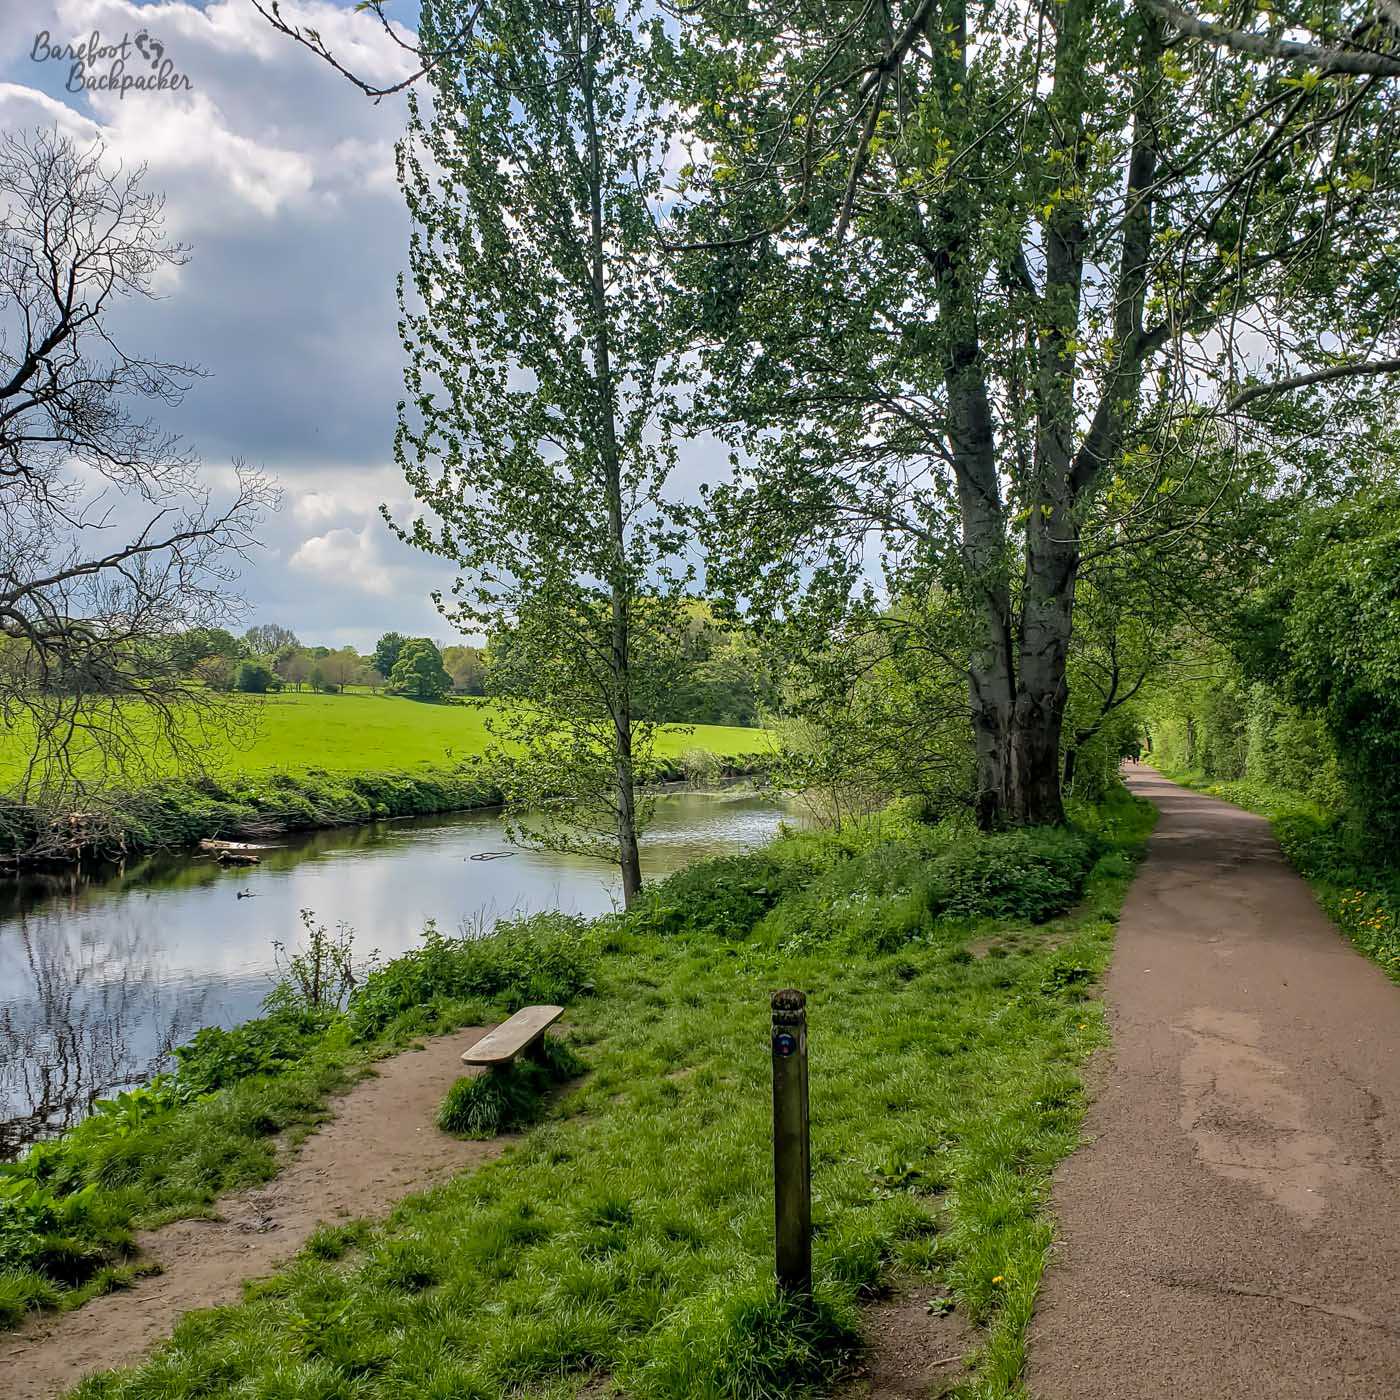 A path in the countryside, next to a river. There's trees between the path and the river, and the other side of the river is an empty field.